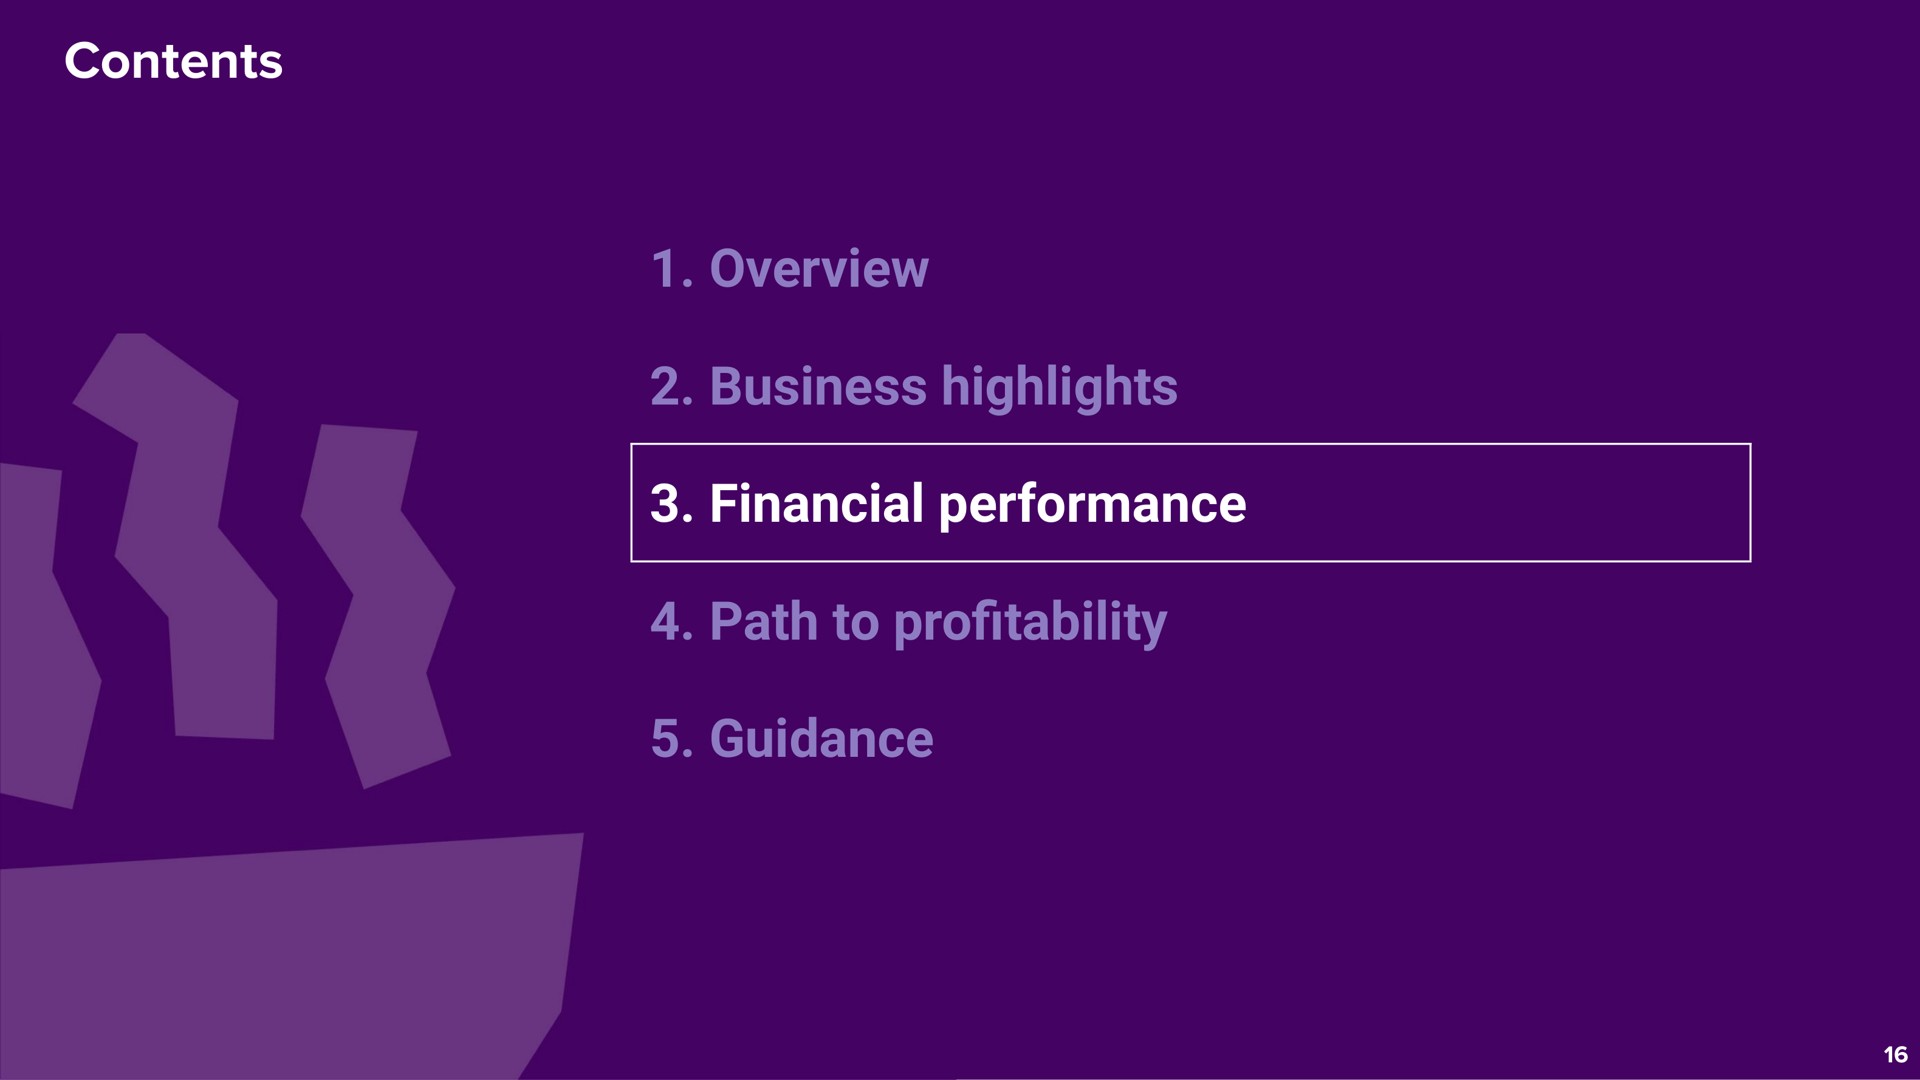 contents overview business highlights financial performance path to pro guidance a profitability | Deliveroo